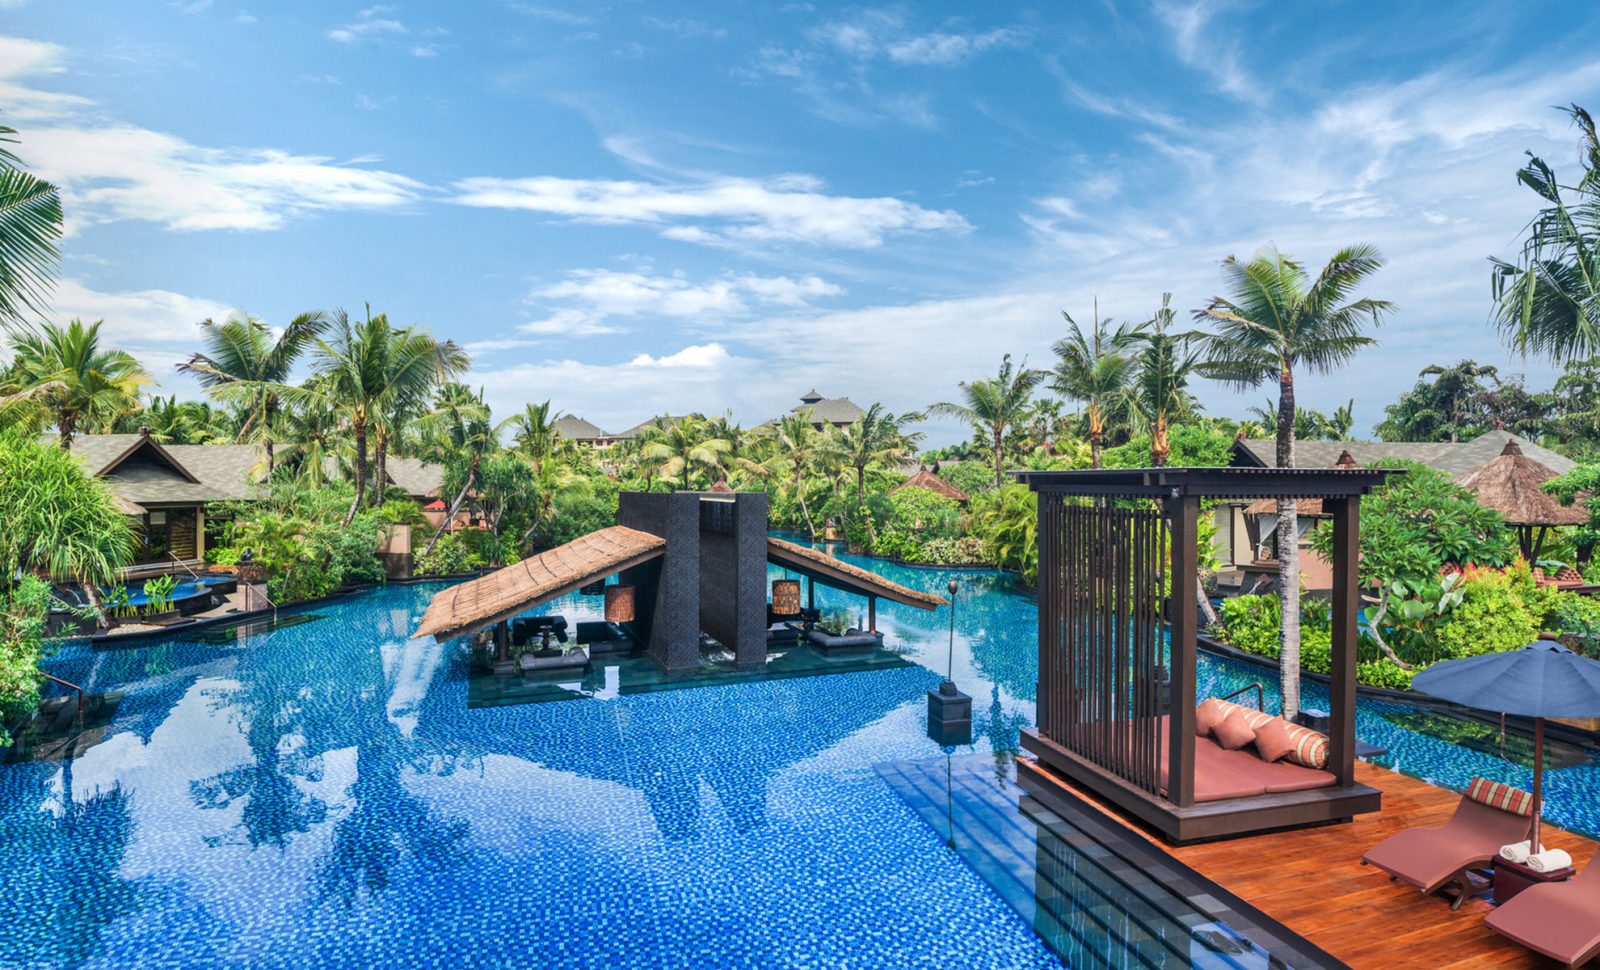 The St. Regis Bali Resort Luxury Bali Holiday Booking All Inclusive